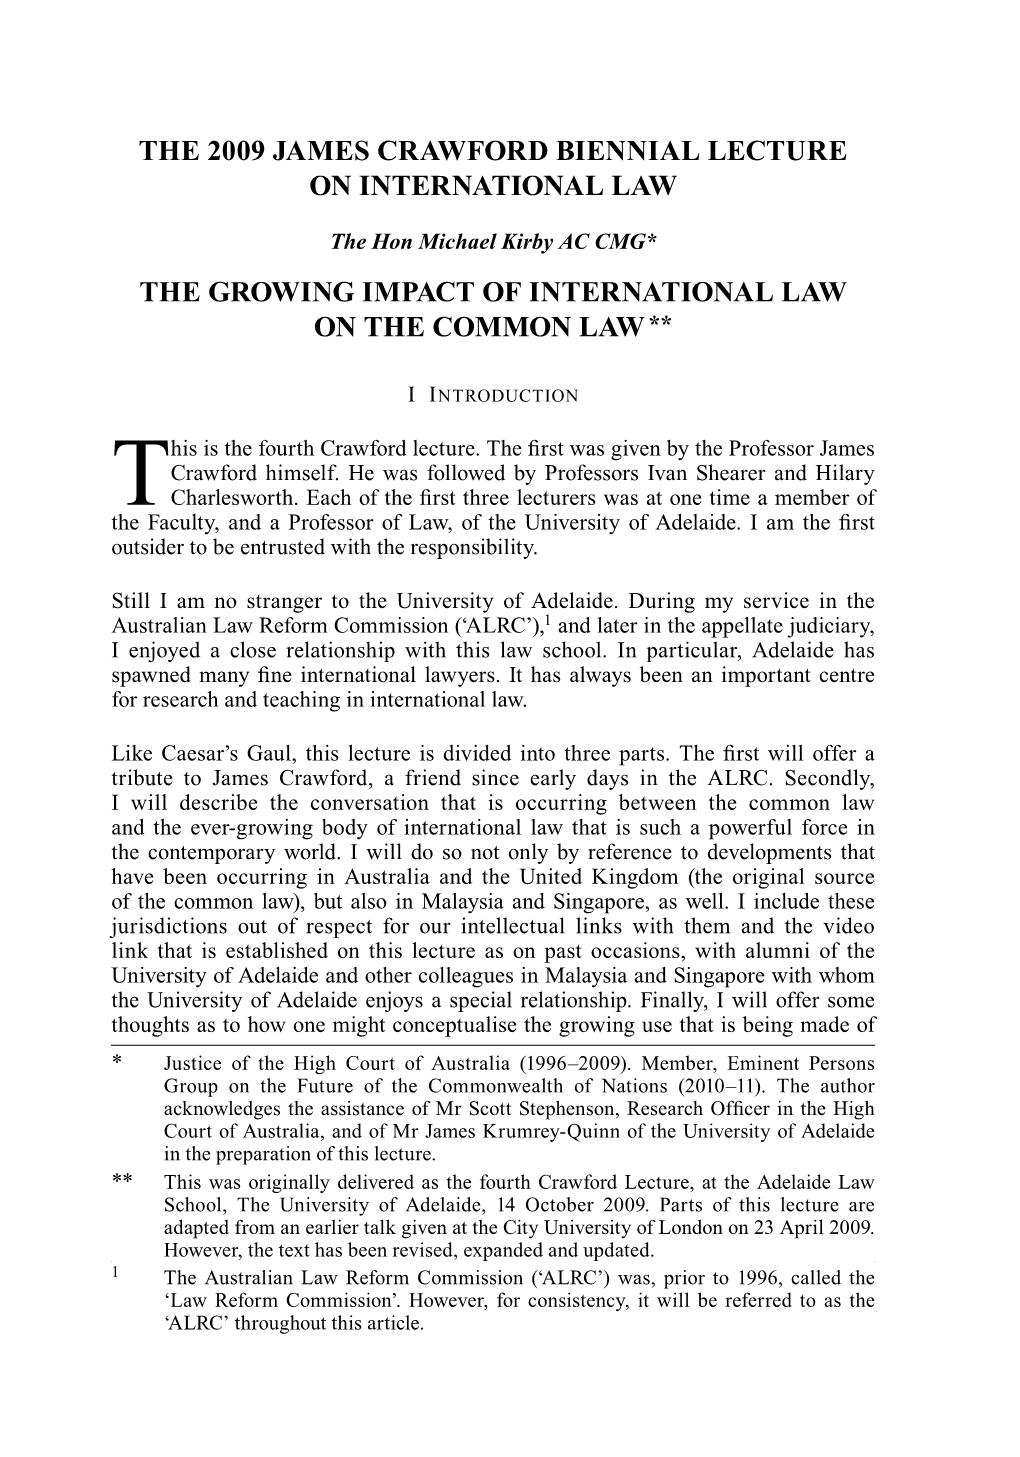 The 2009 James Crawford Biennial Lecture on International Law